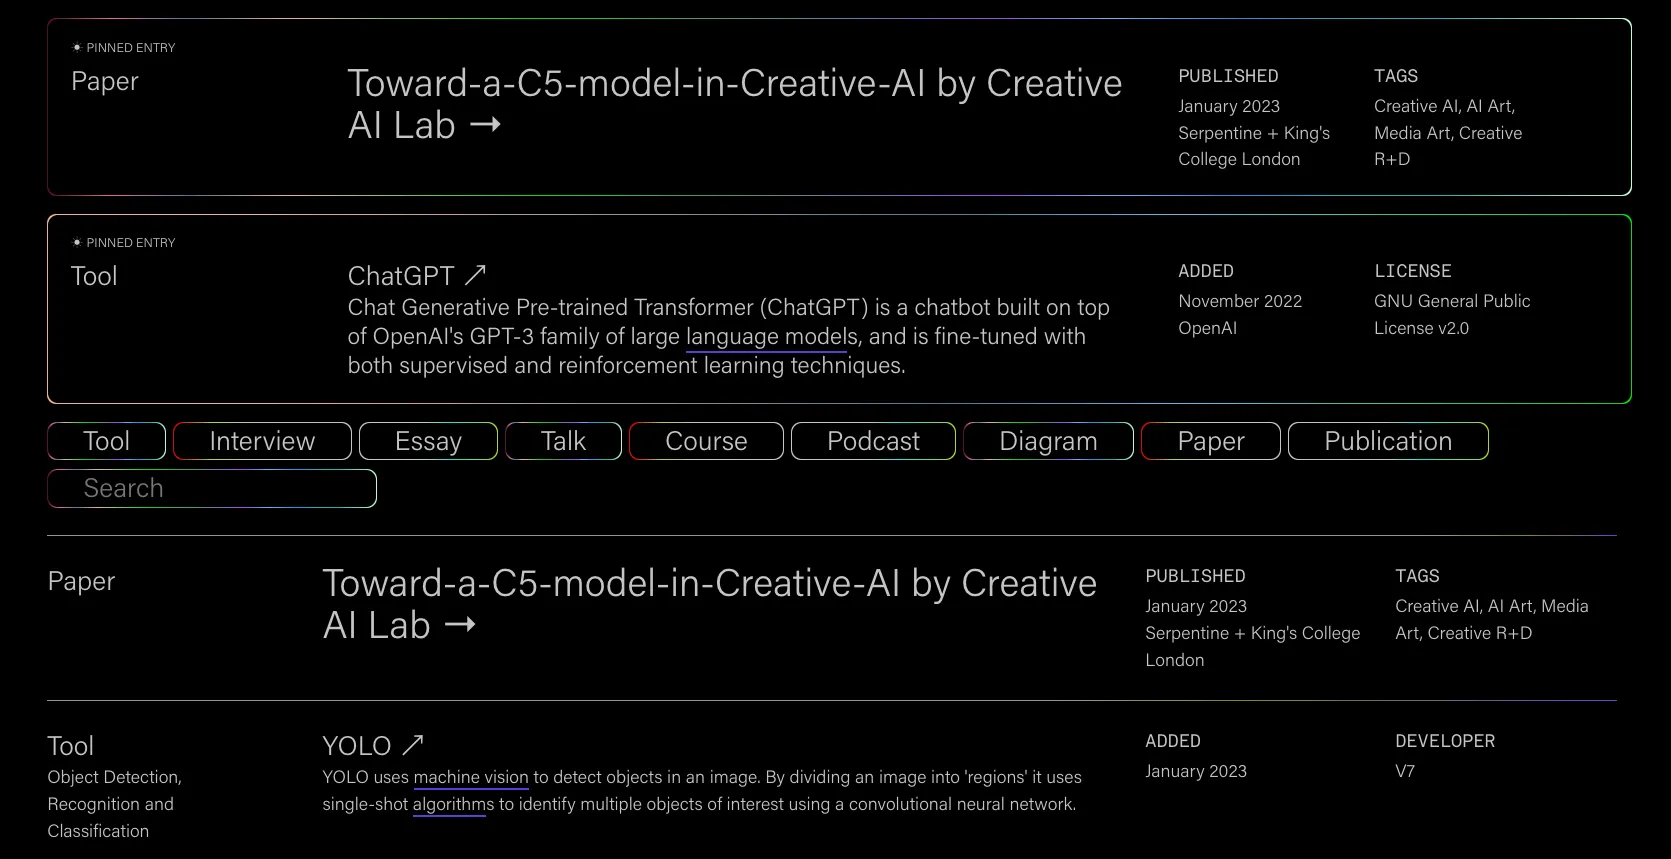 The image shows homepage of the Creative AI Lab's website.